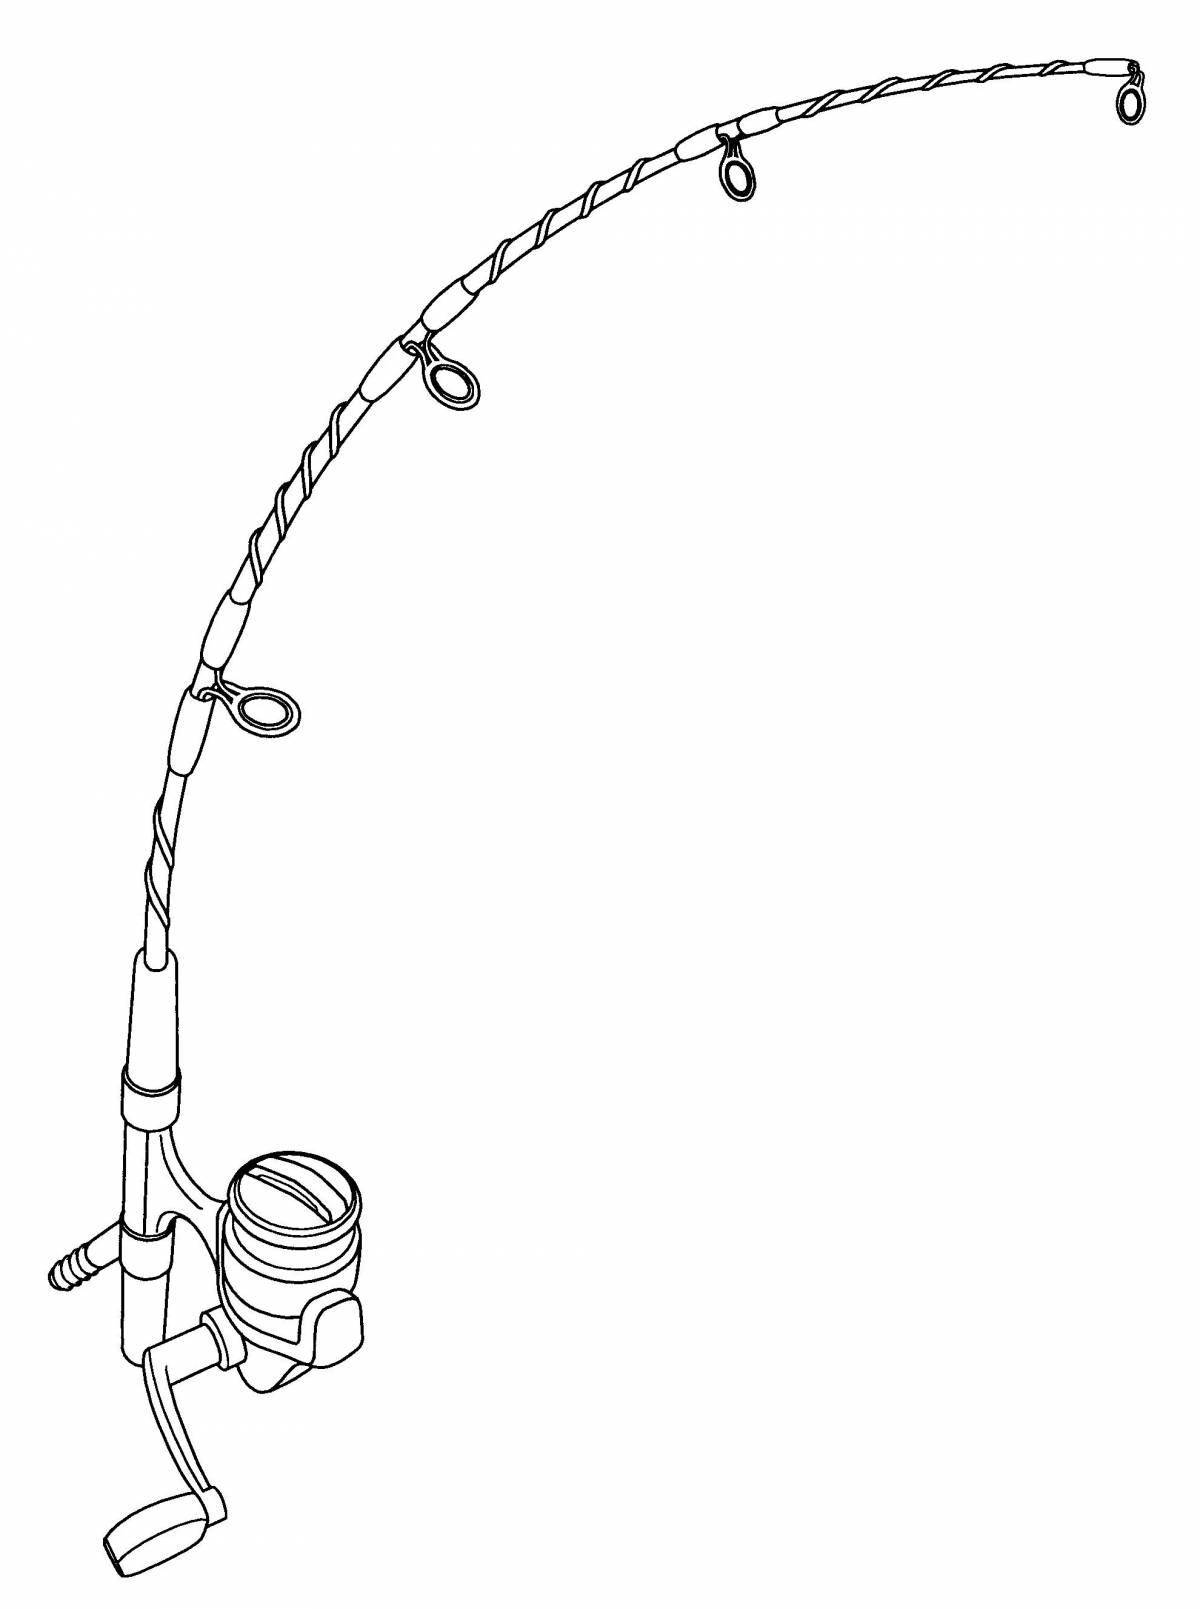 Exciting fishing rod coloring page for kids